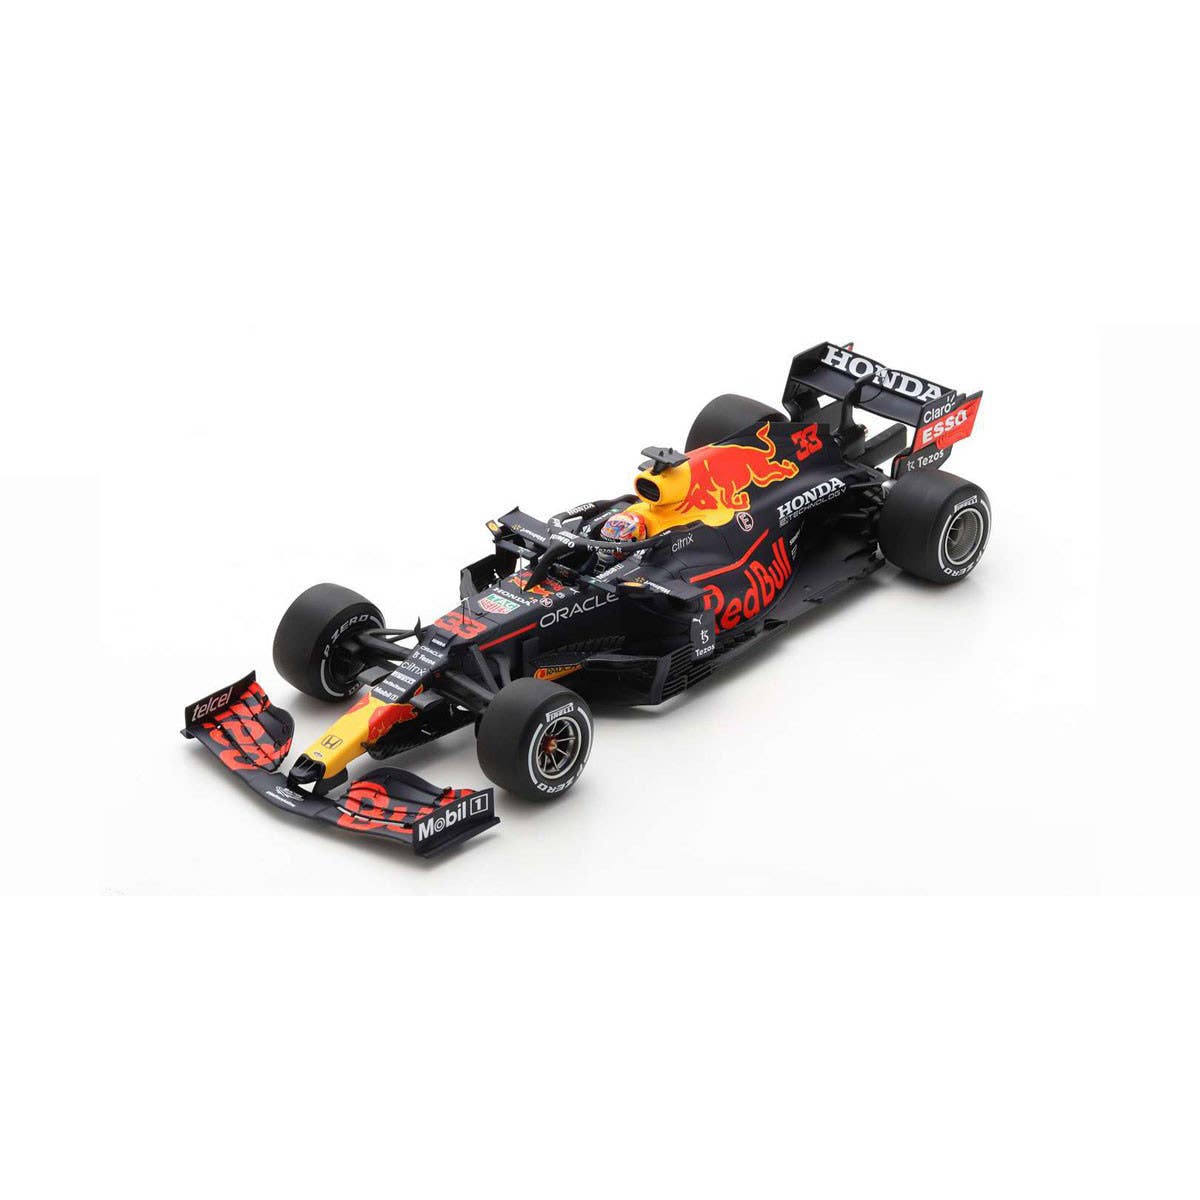 Red Bull Racing Honda RB16B No.33 Red Bull Racing - Winner Dutch GP 2021 - Max Verstappen.  With Acrylic Cover.  Limited 321 - 1:12 Scale Resin Model Car